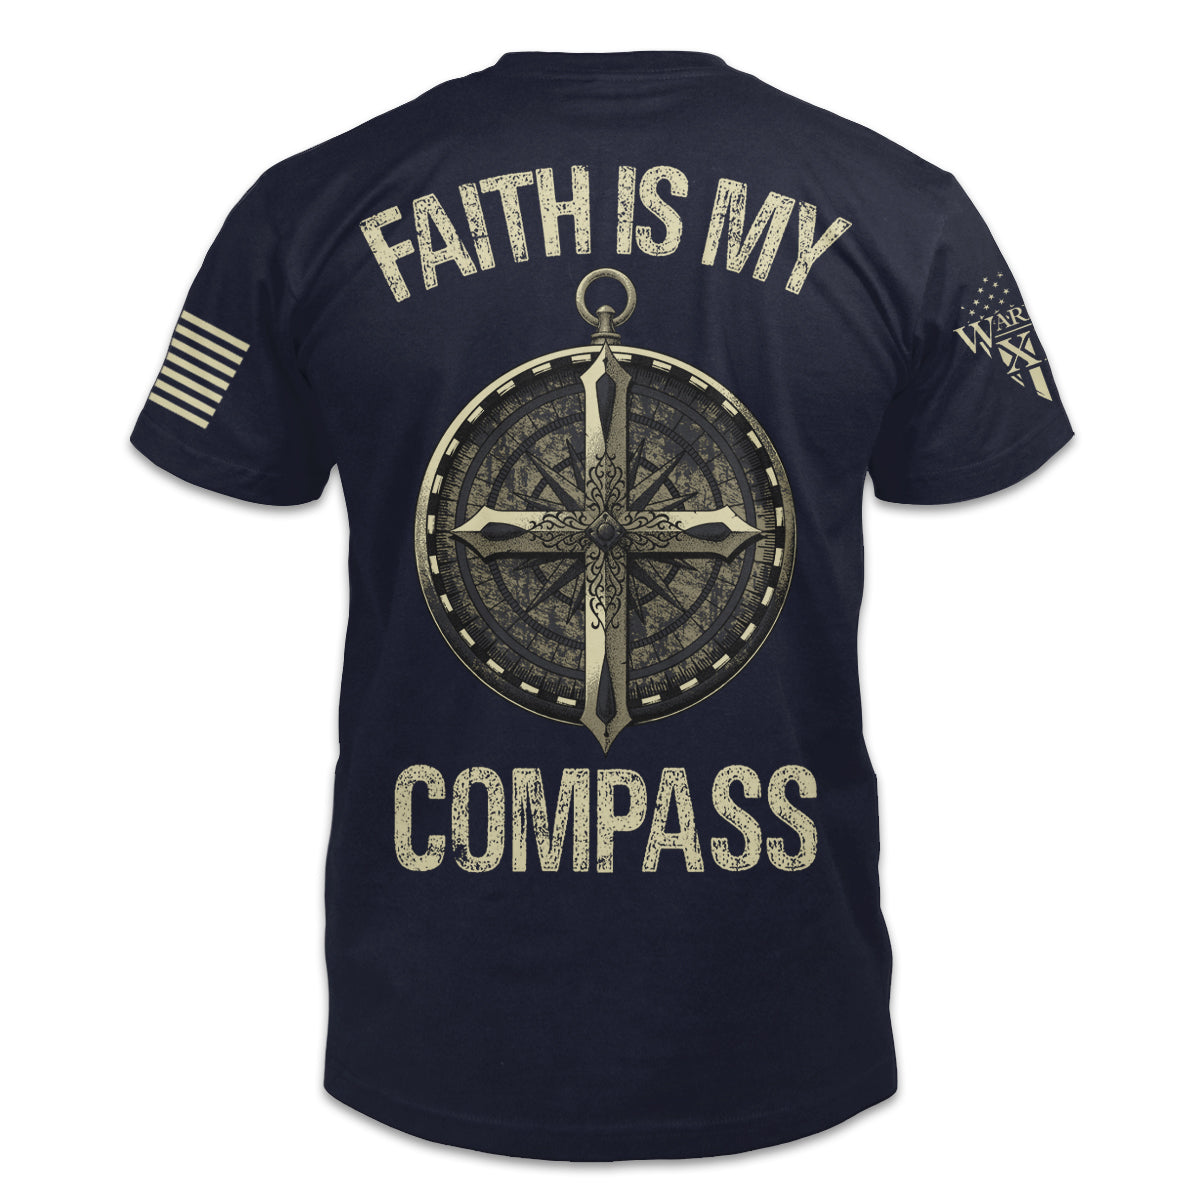 A navy blue t-shirt with an image on the back of a compass with a Christian Cross on it with the words "Faith is my Compass".